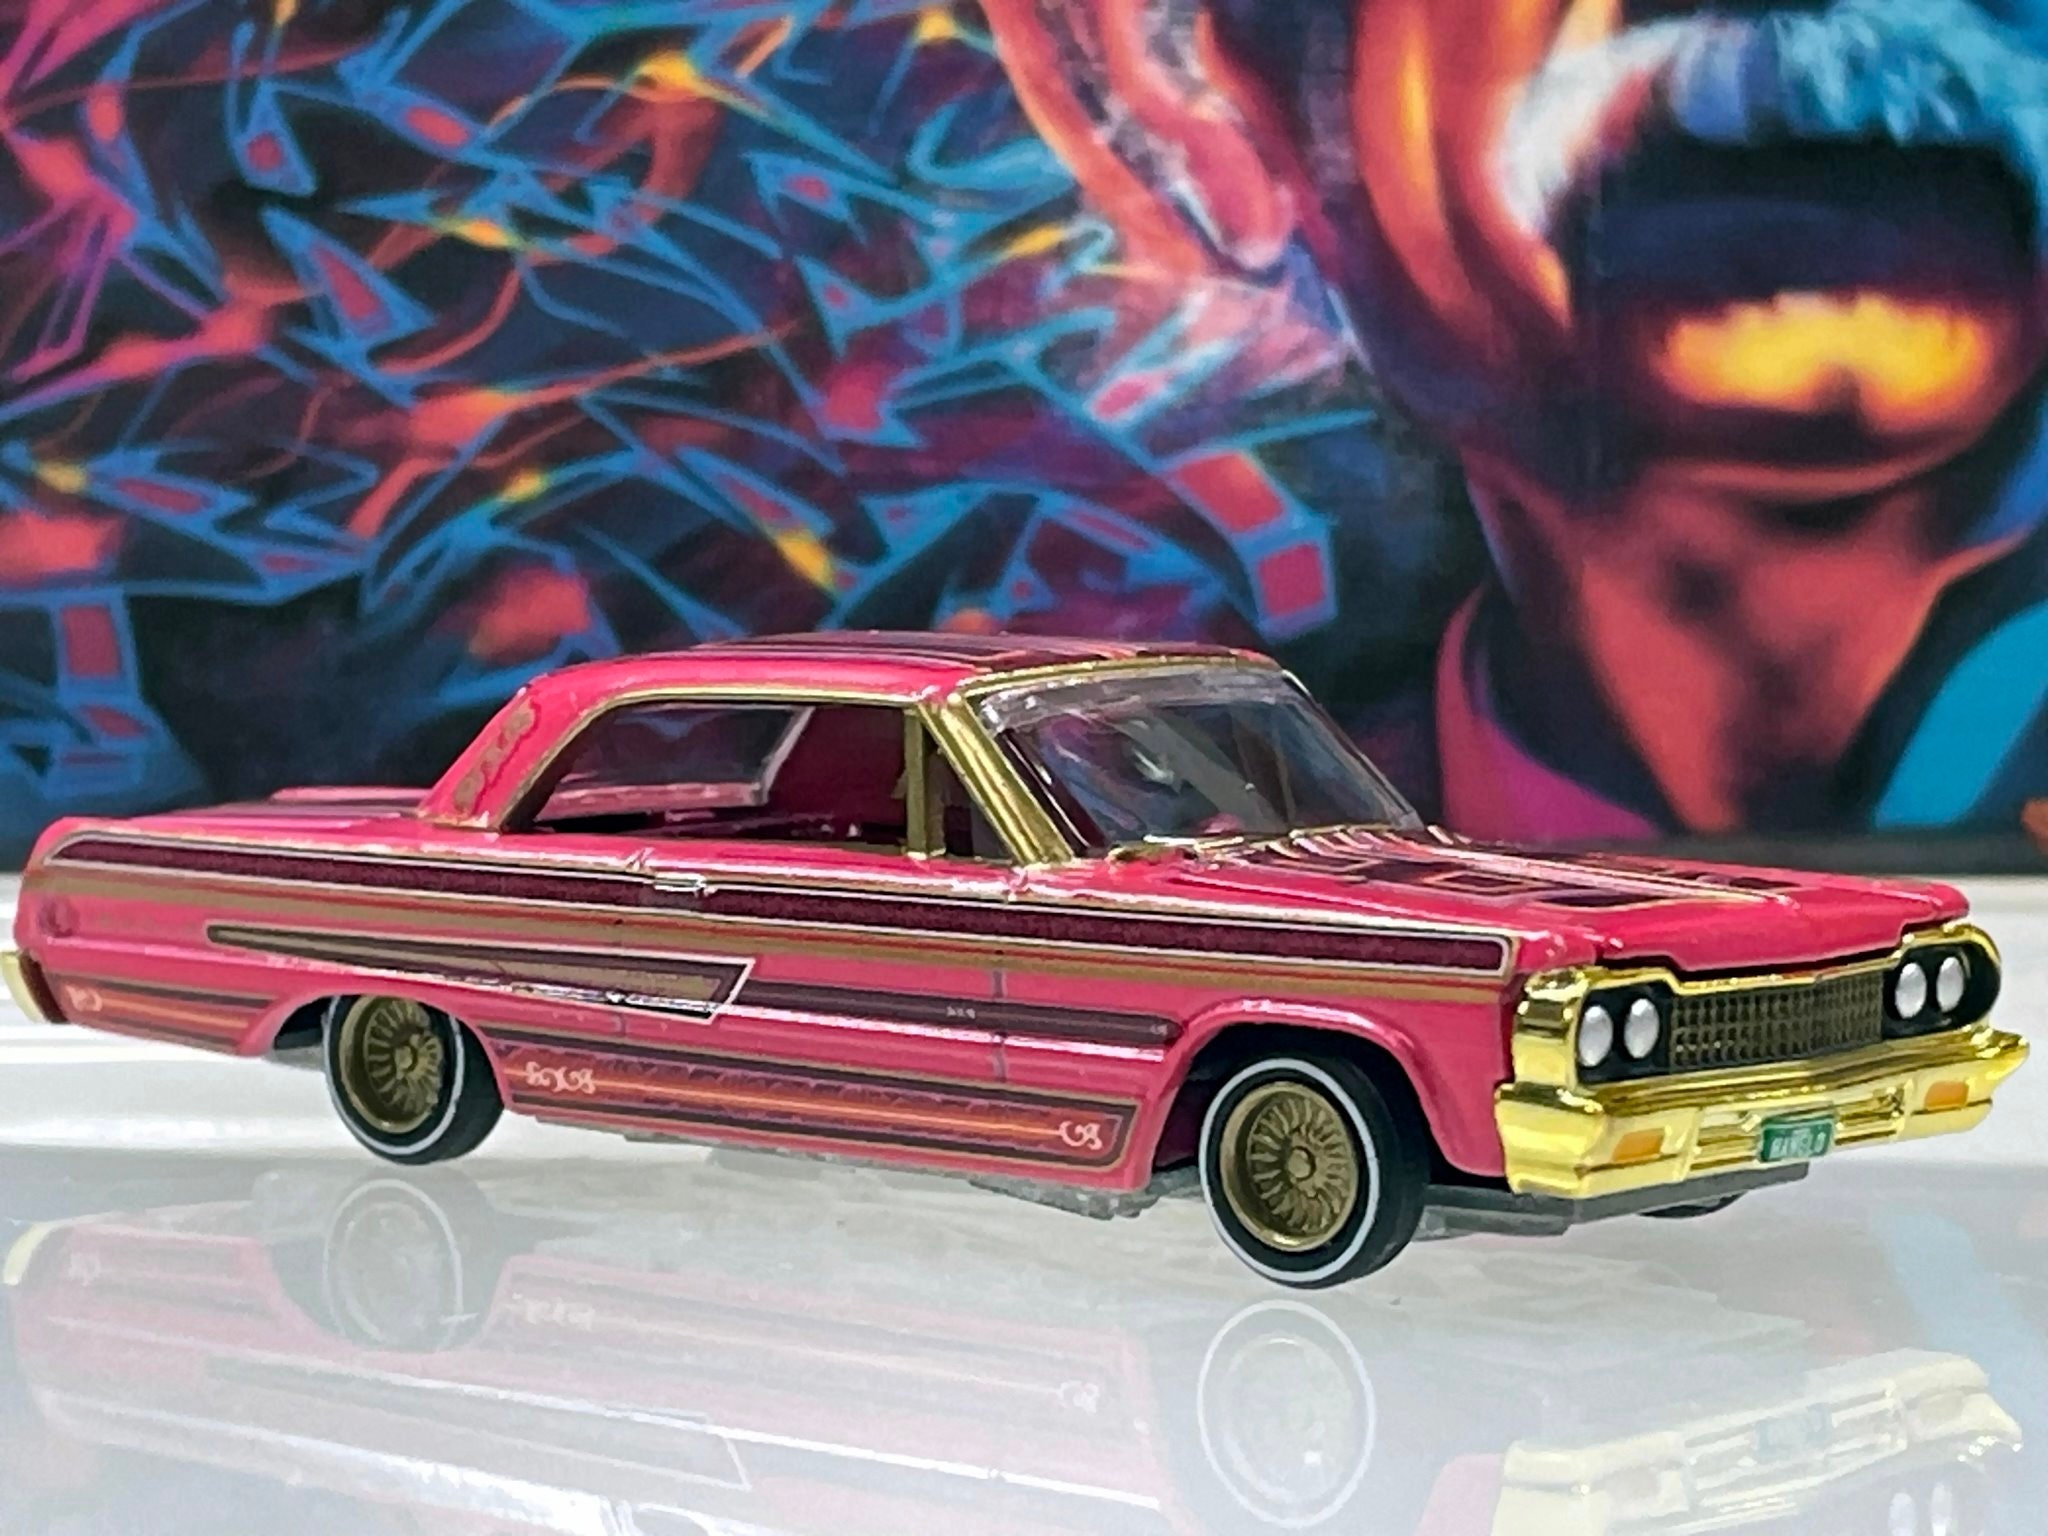 Greenlight 1:64 1964 Chevrolet Impala SS Lowriders Limited 3,600 Pcs- – Hot  Match Collectables